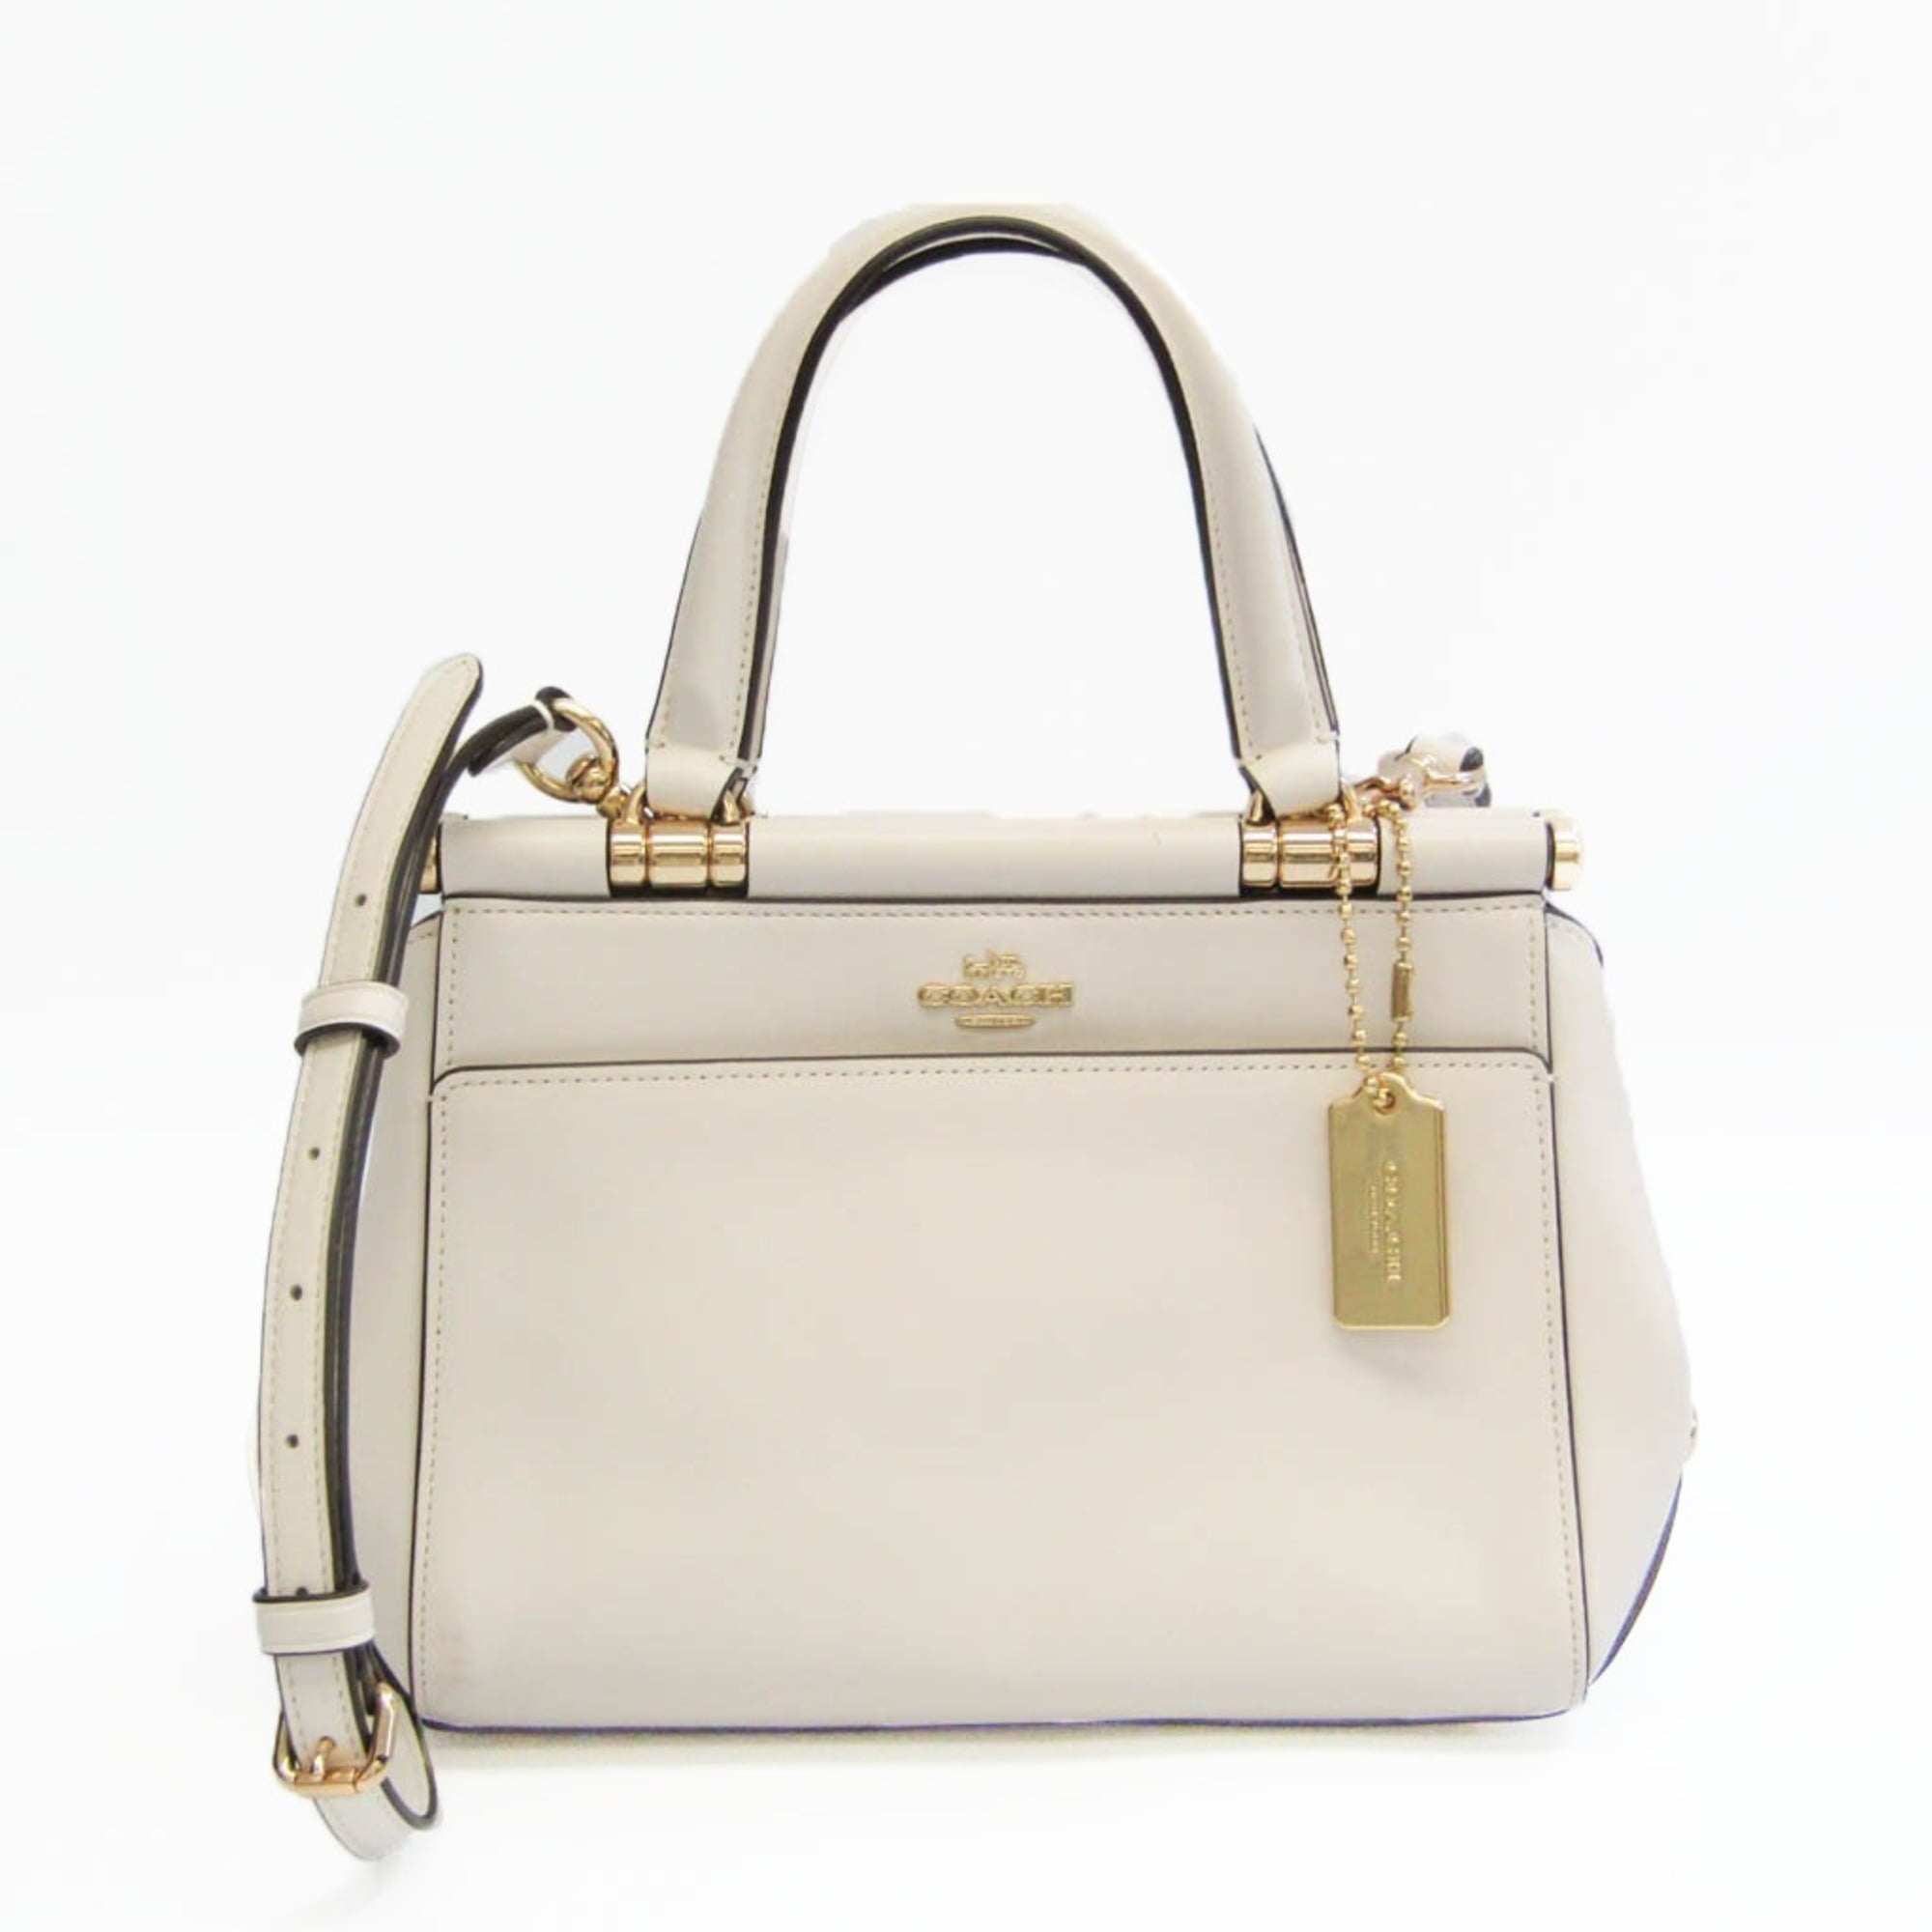 Coach - Authenticated Purse - Leather White for Women, Never Worn